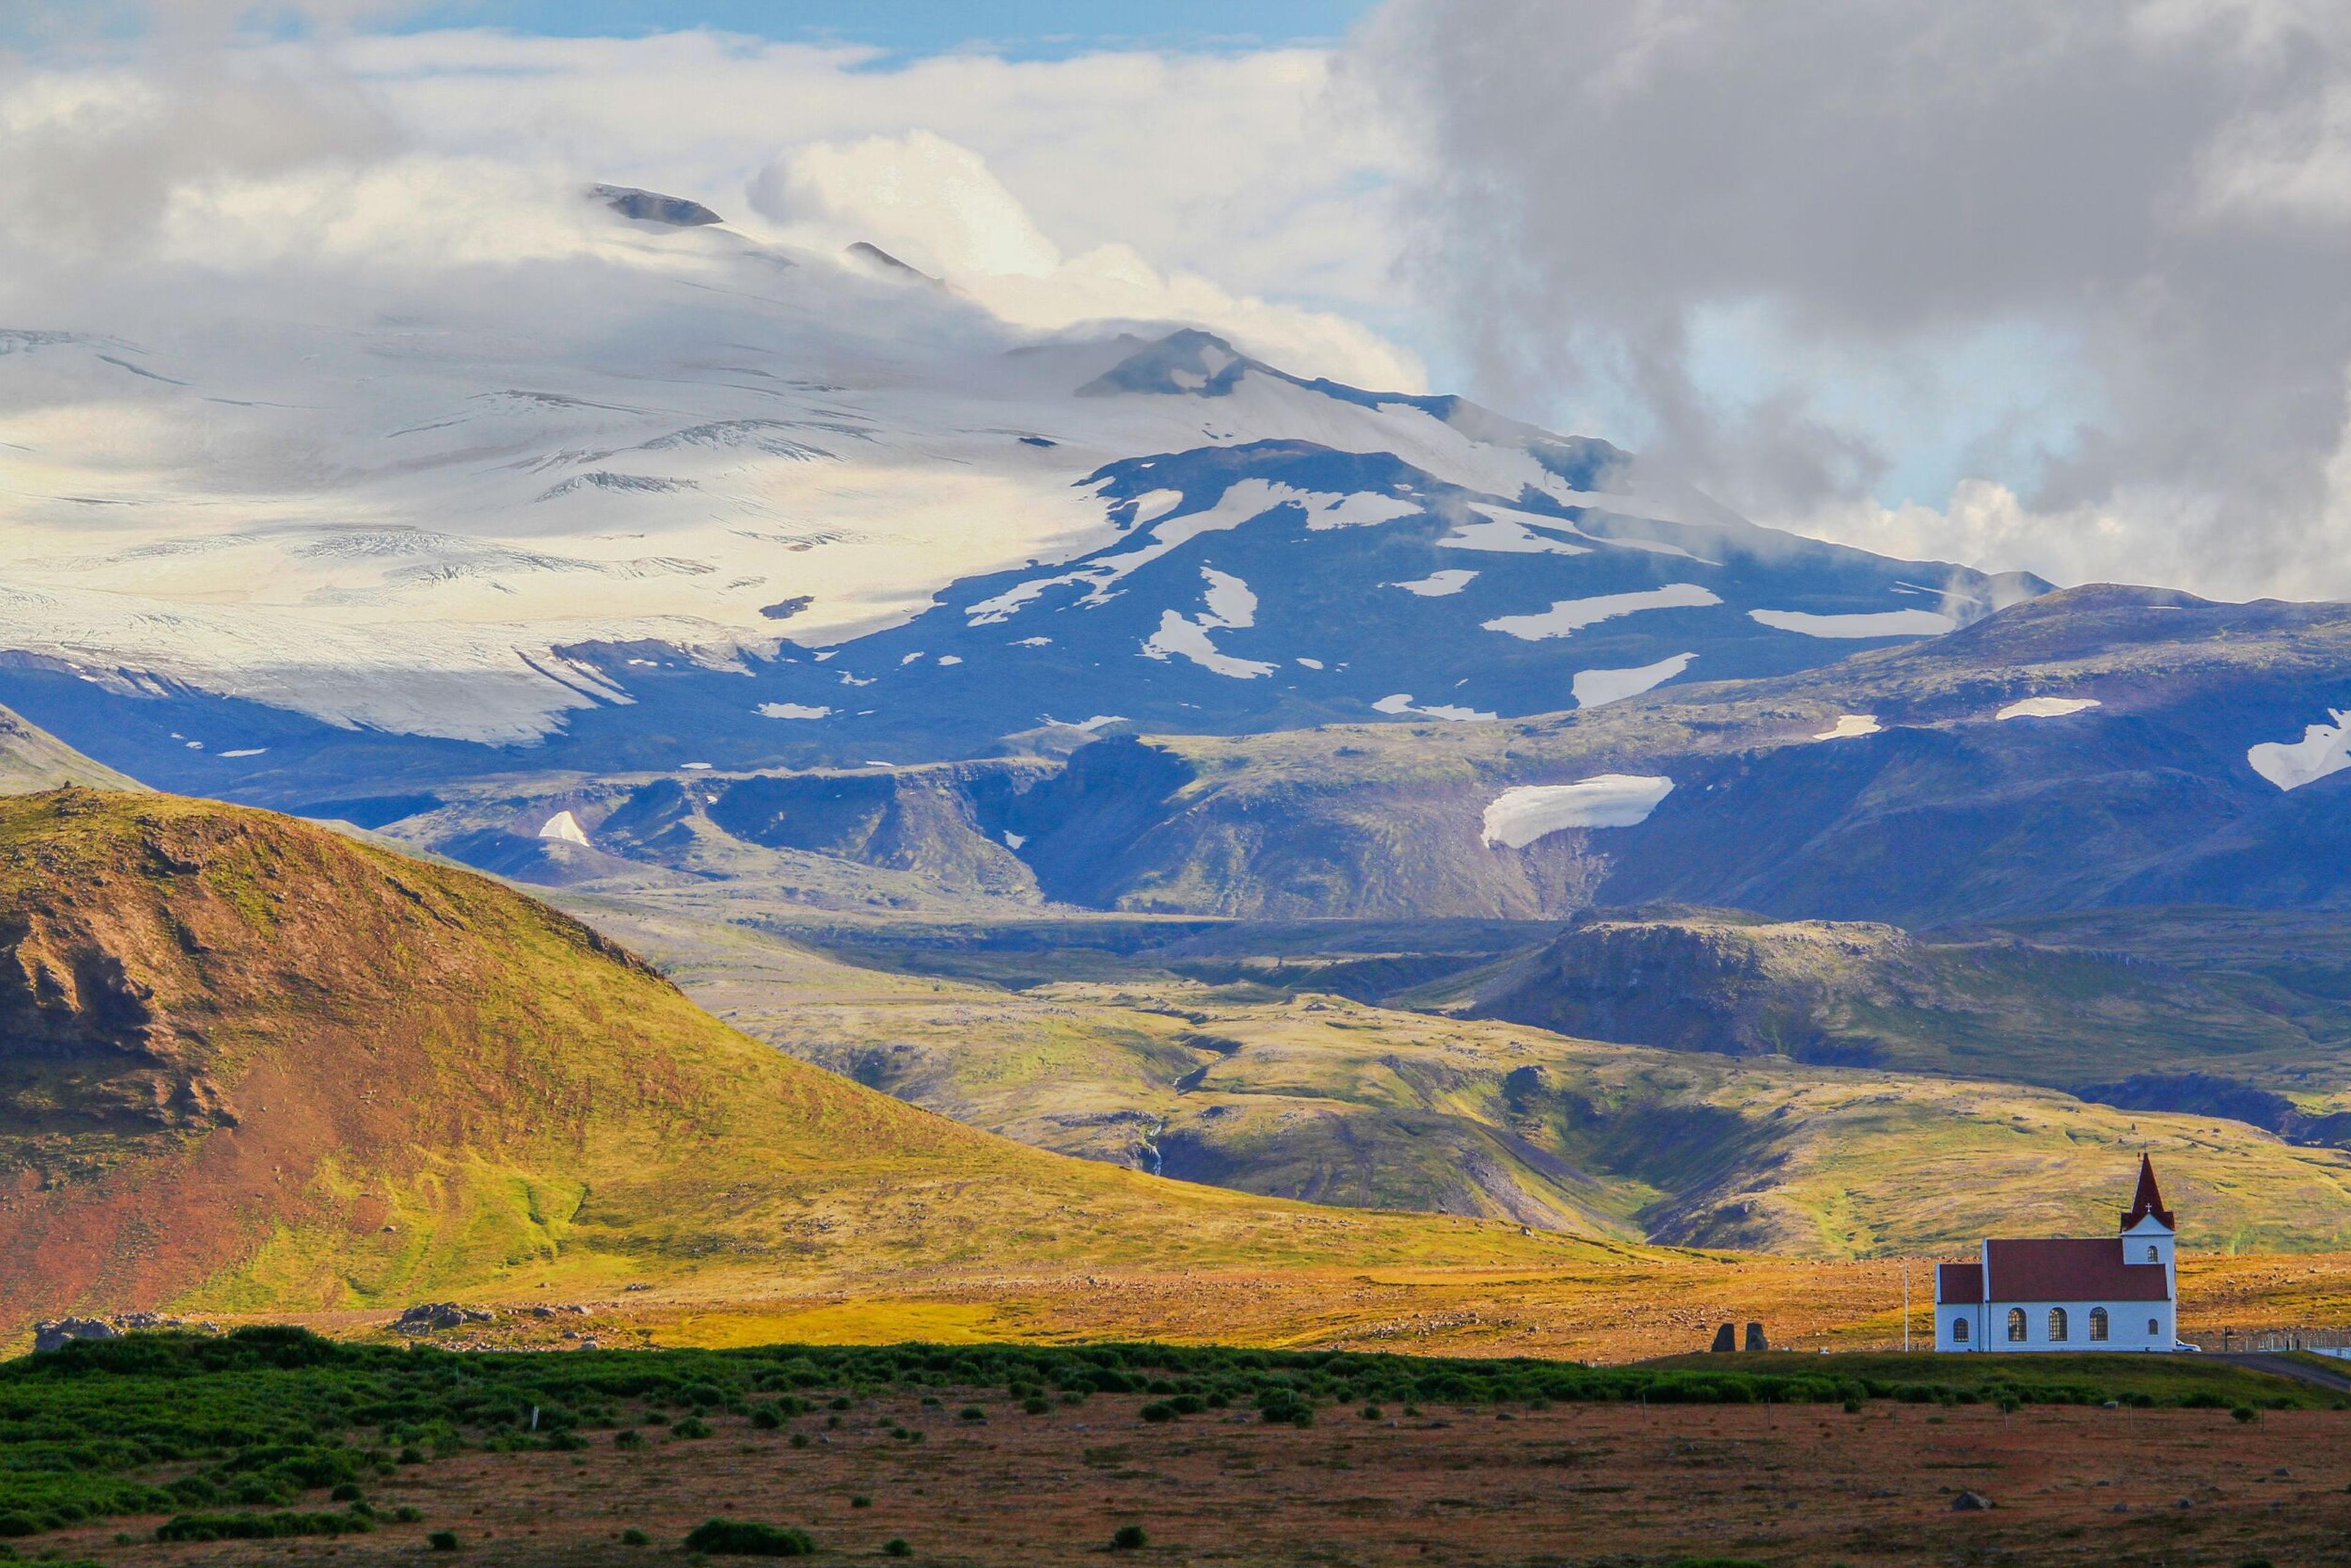 A lone church with a red roof sits in a vast landscape with lush green fields in the foreground and a large, snow-capped mountain range in the background under a cloudy sky.